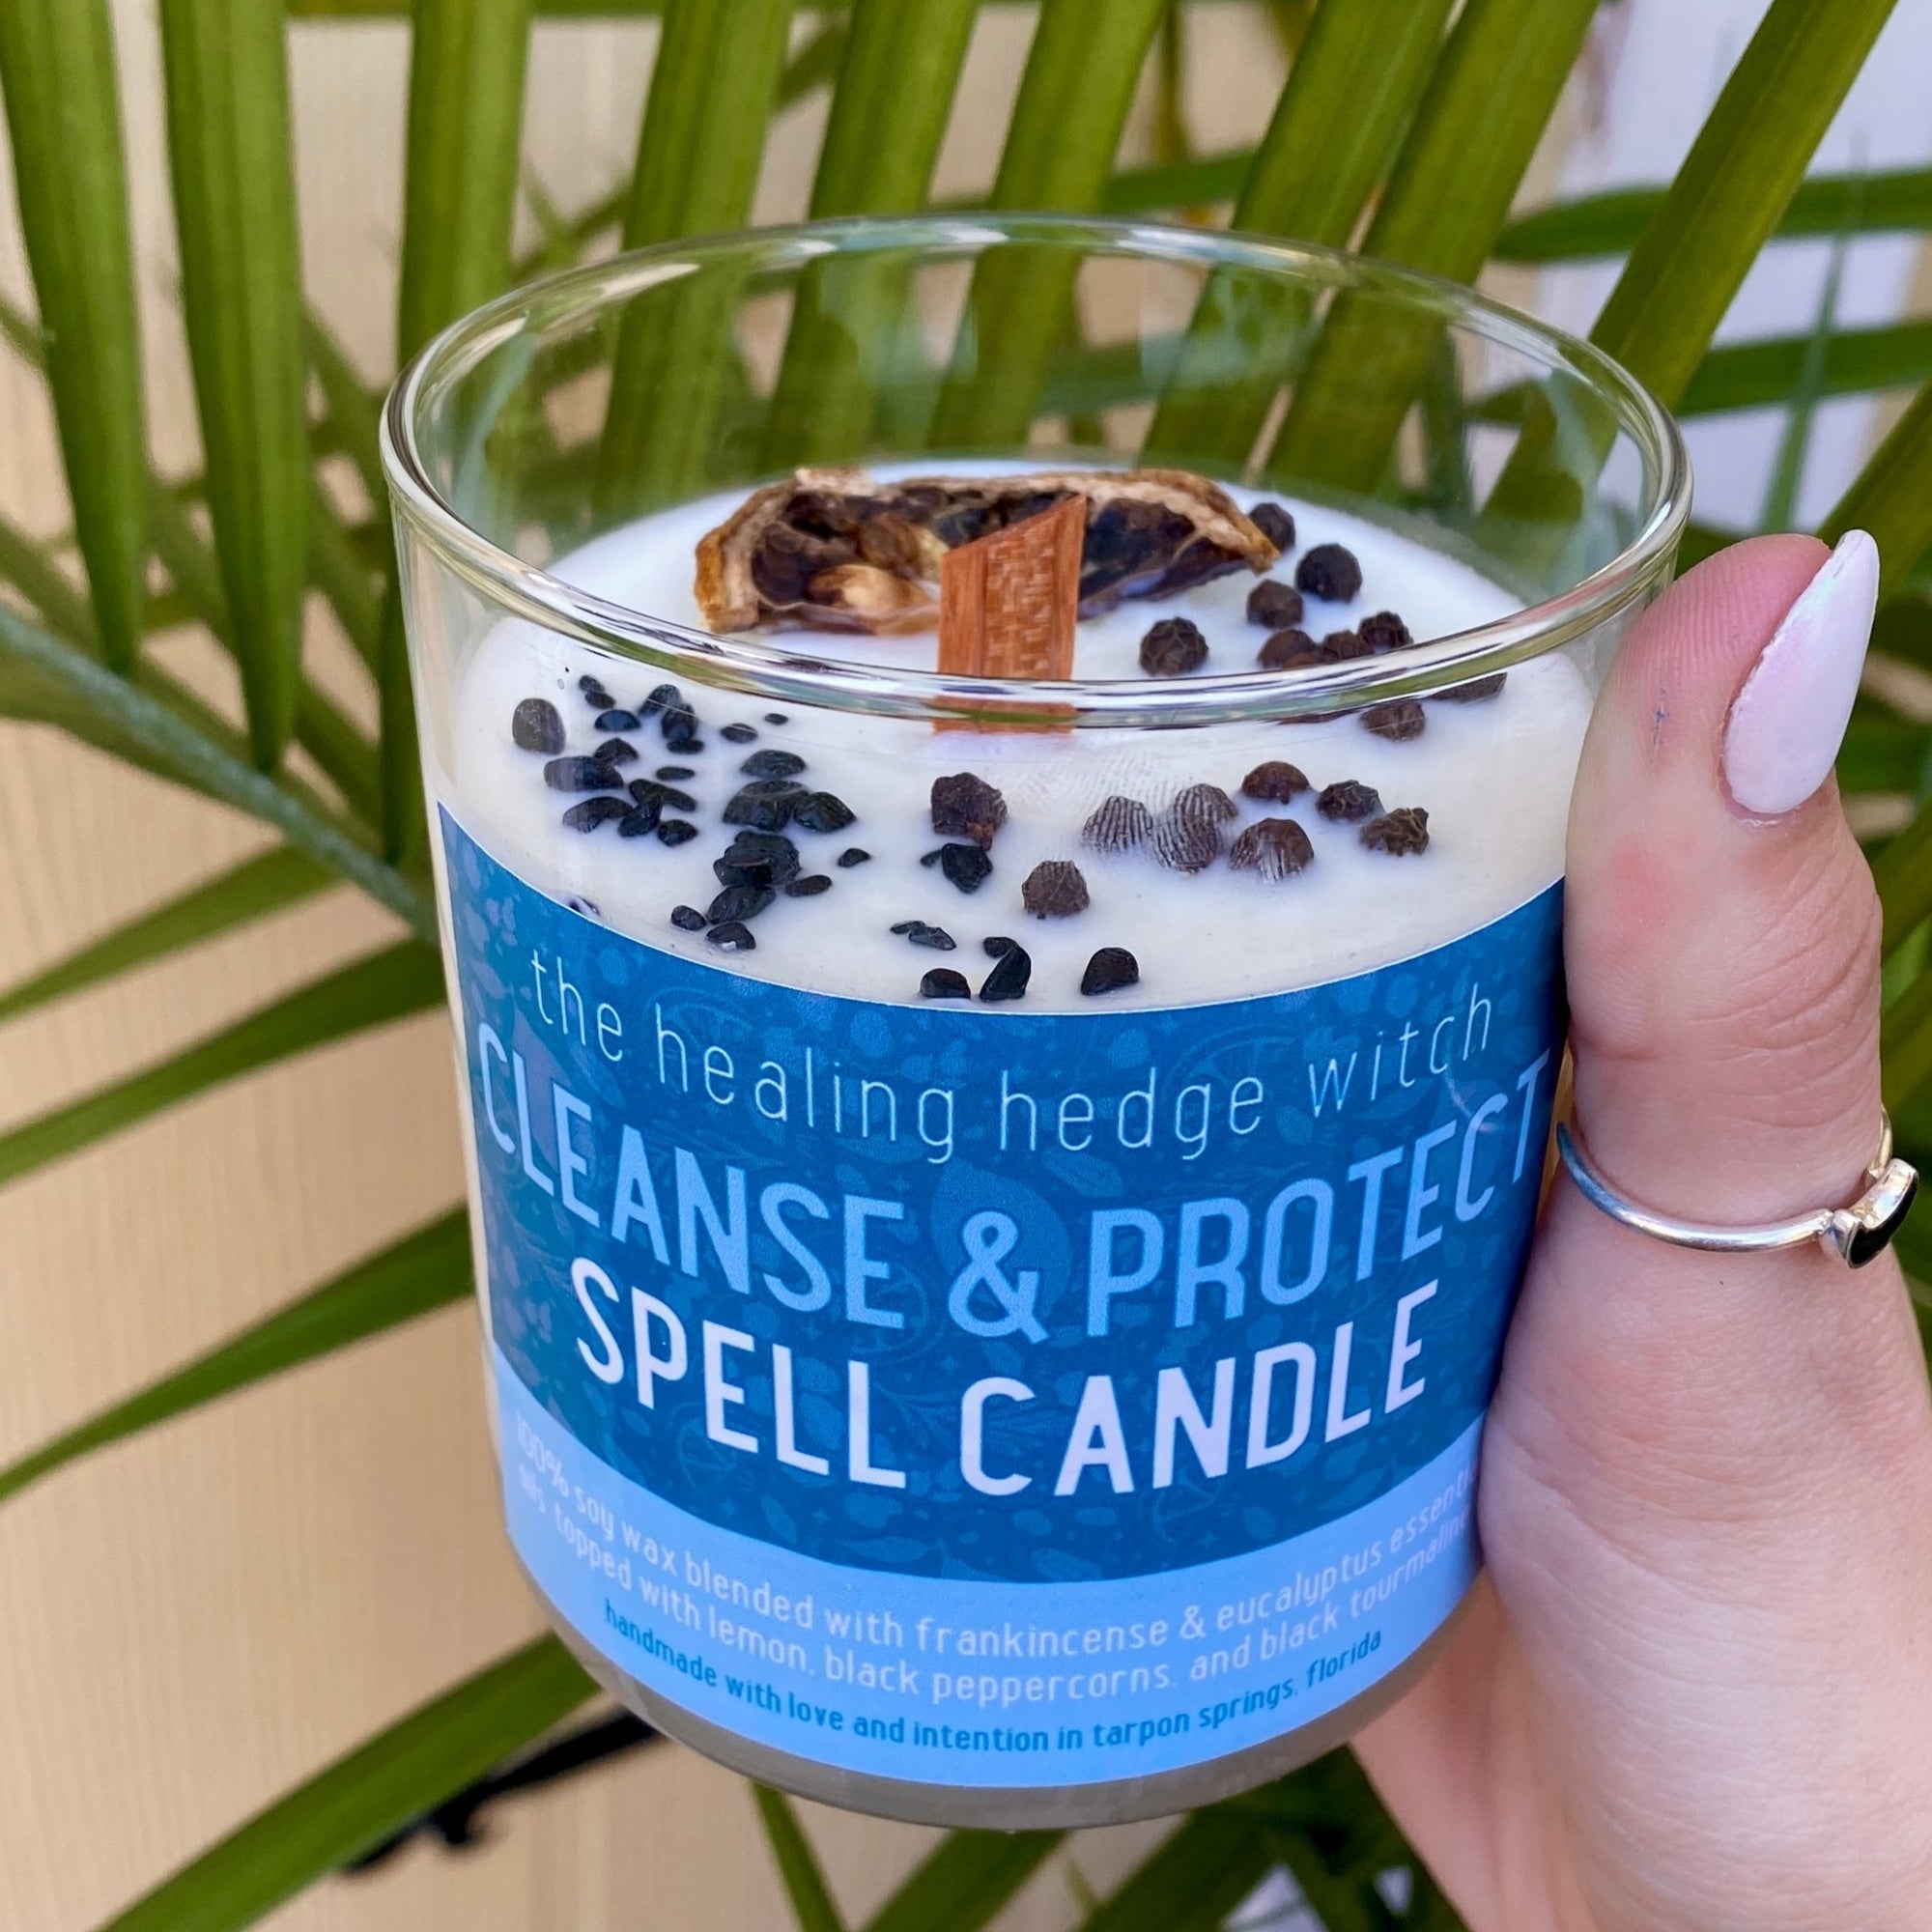 Cleanse & Protect Spell Candle